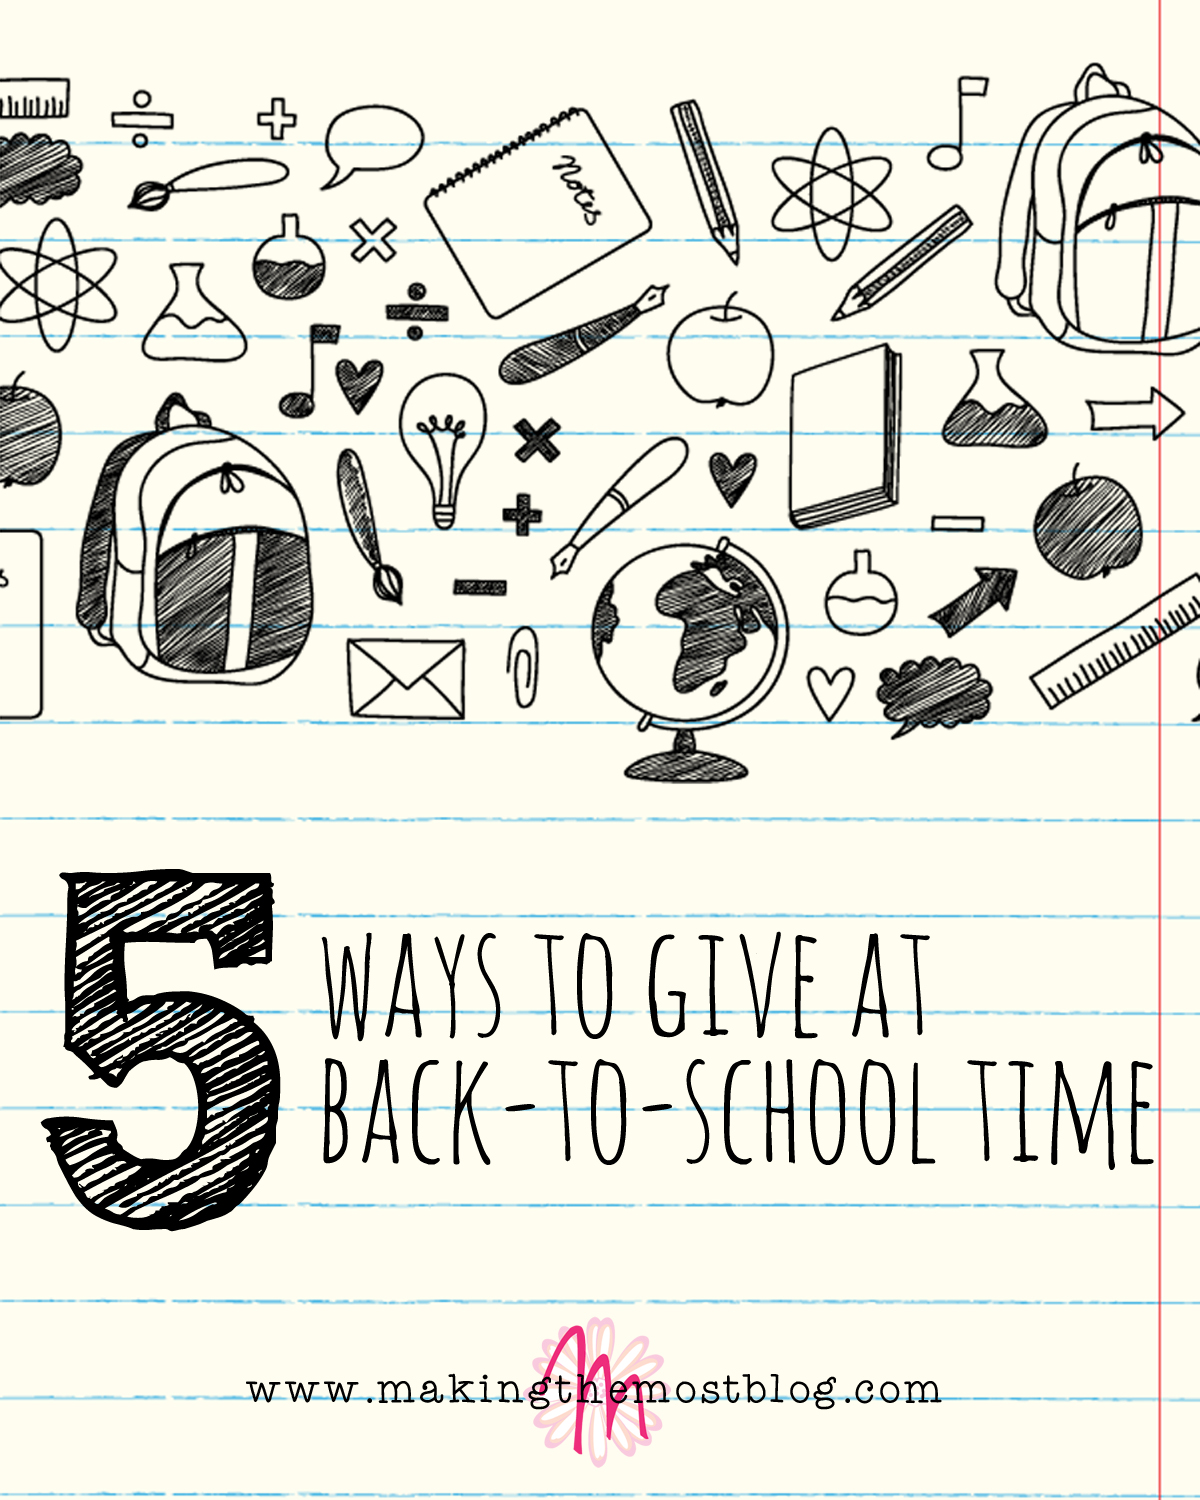 5 Ways to Give at Back-to-School Time | Making the Most Blog